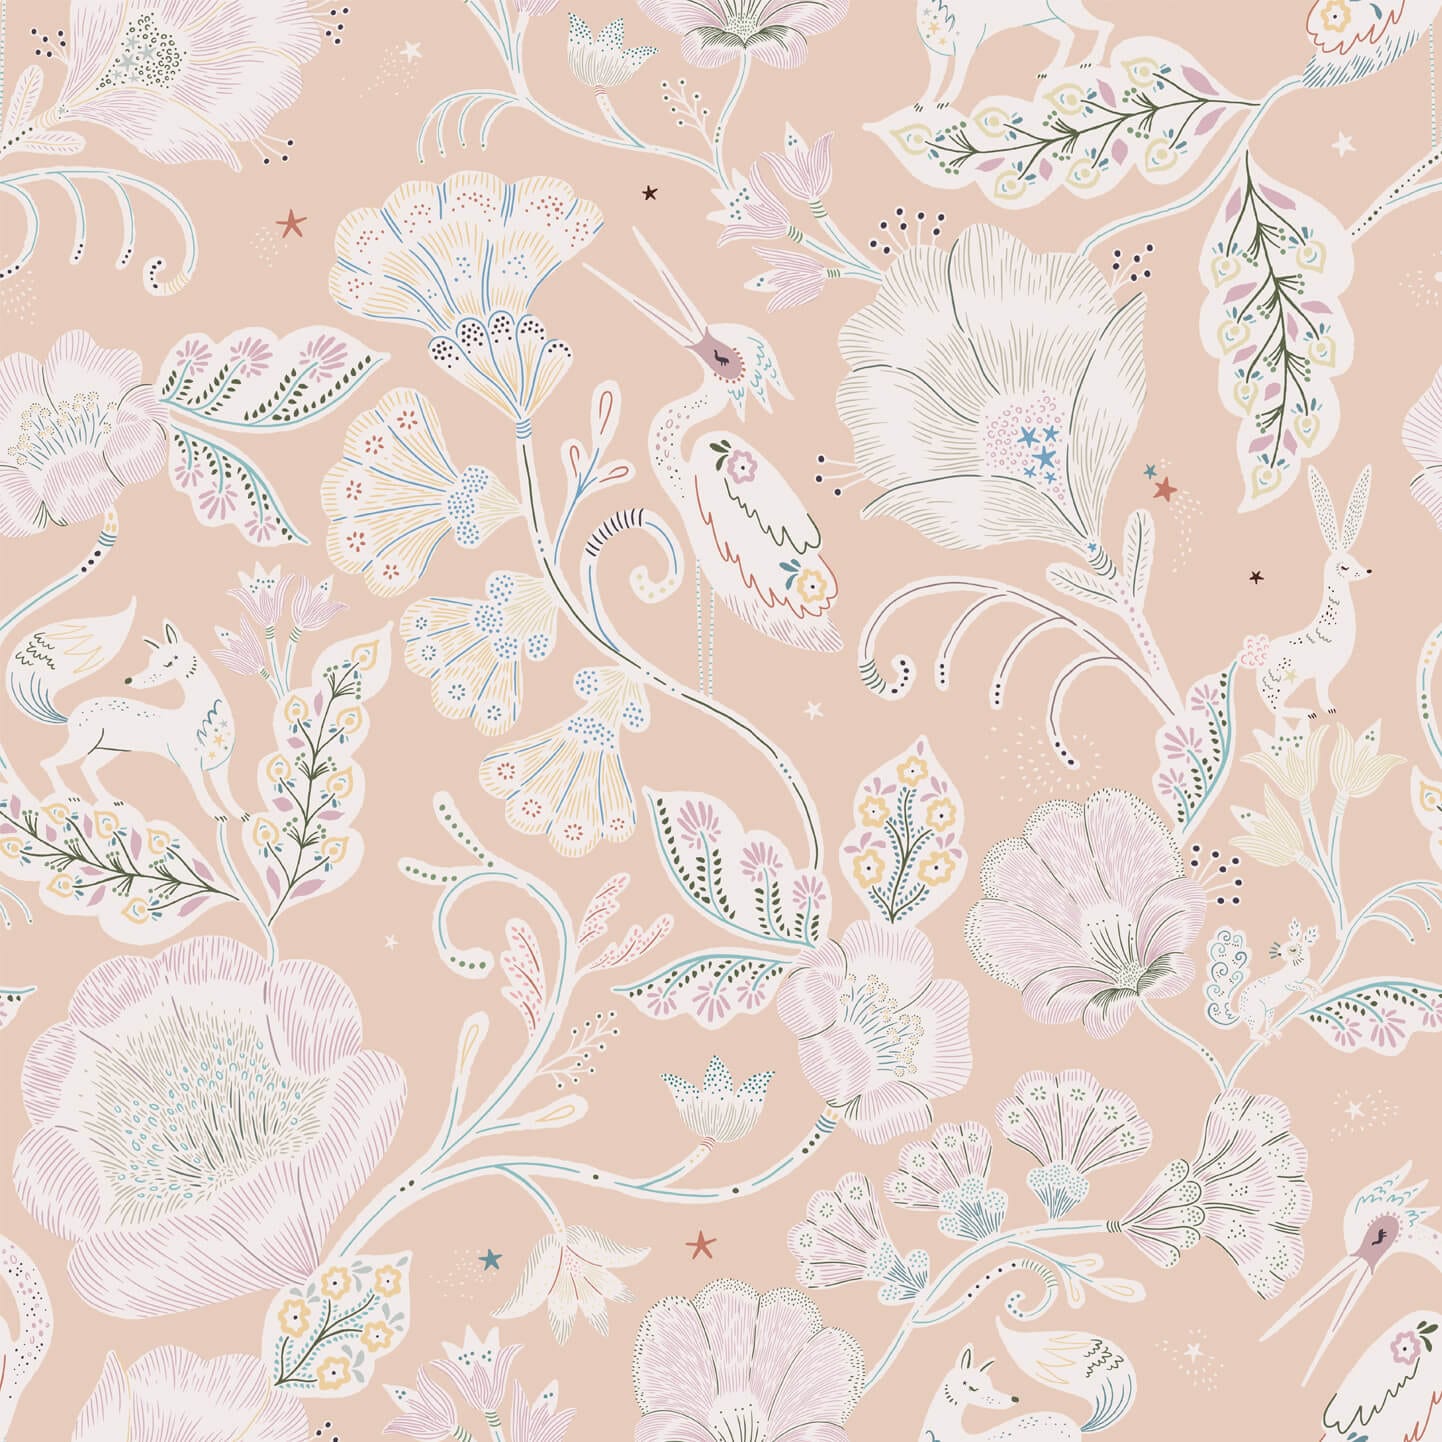 Wallpaper sample with a peach background and white animals such as storks and wolves with pretty floral patterns.